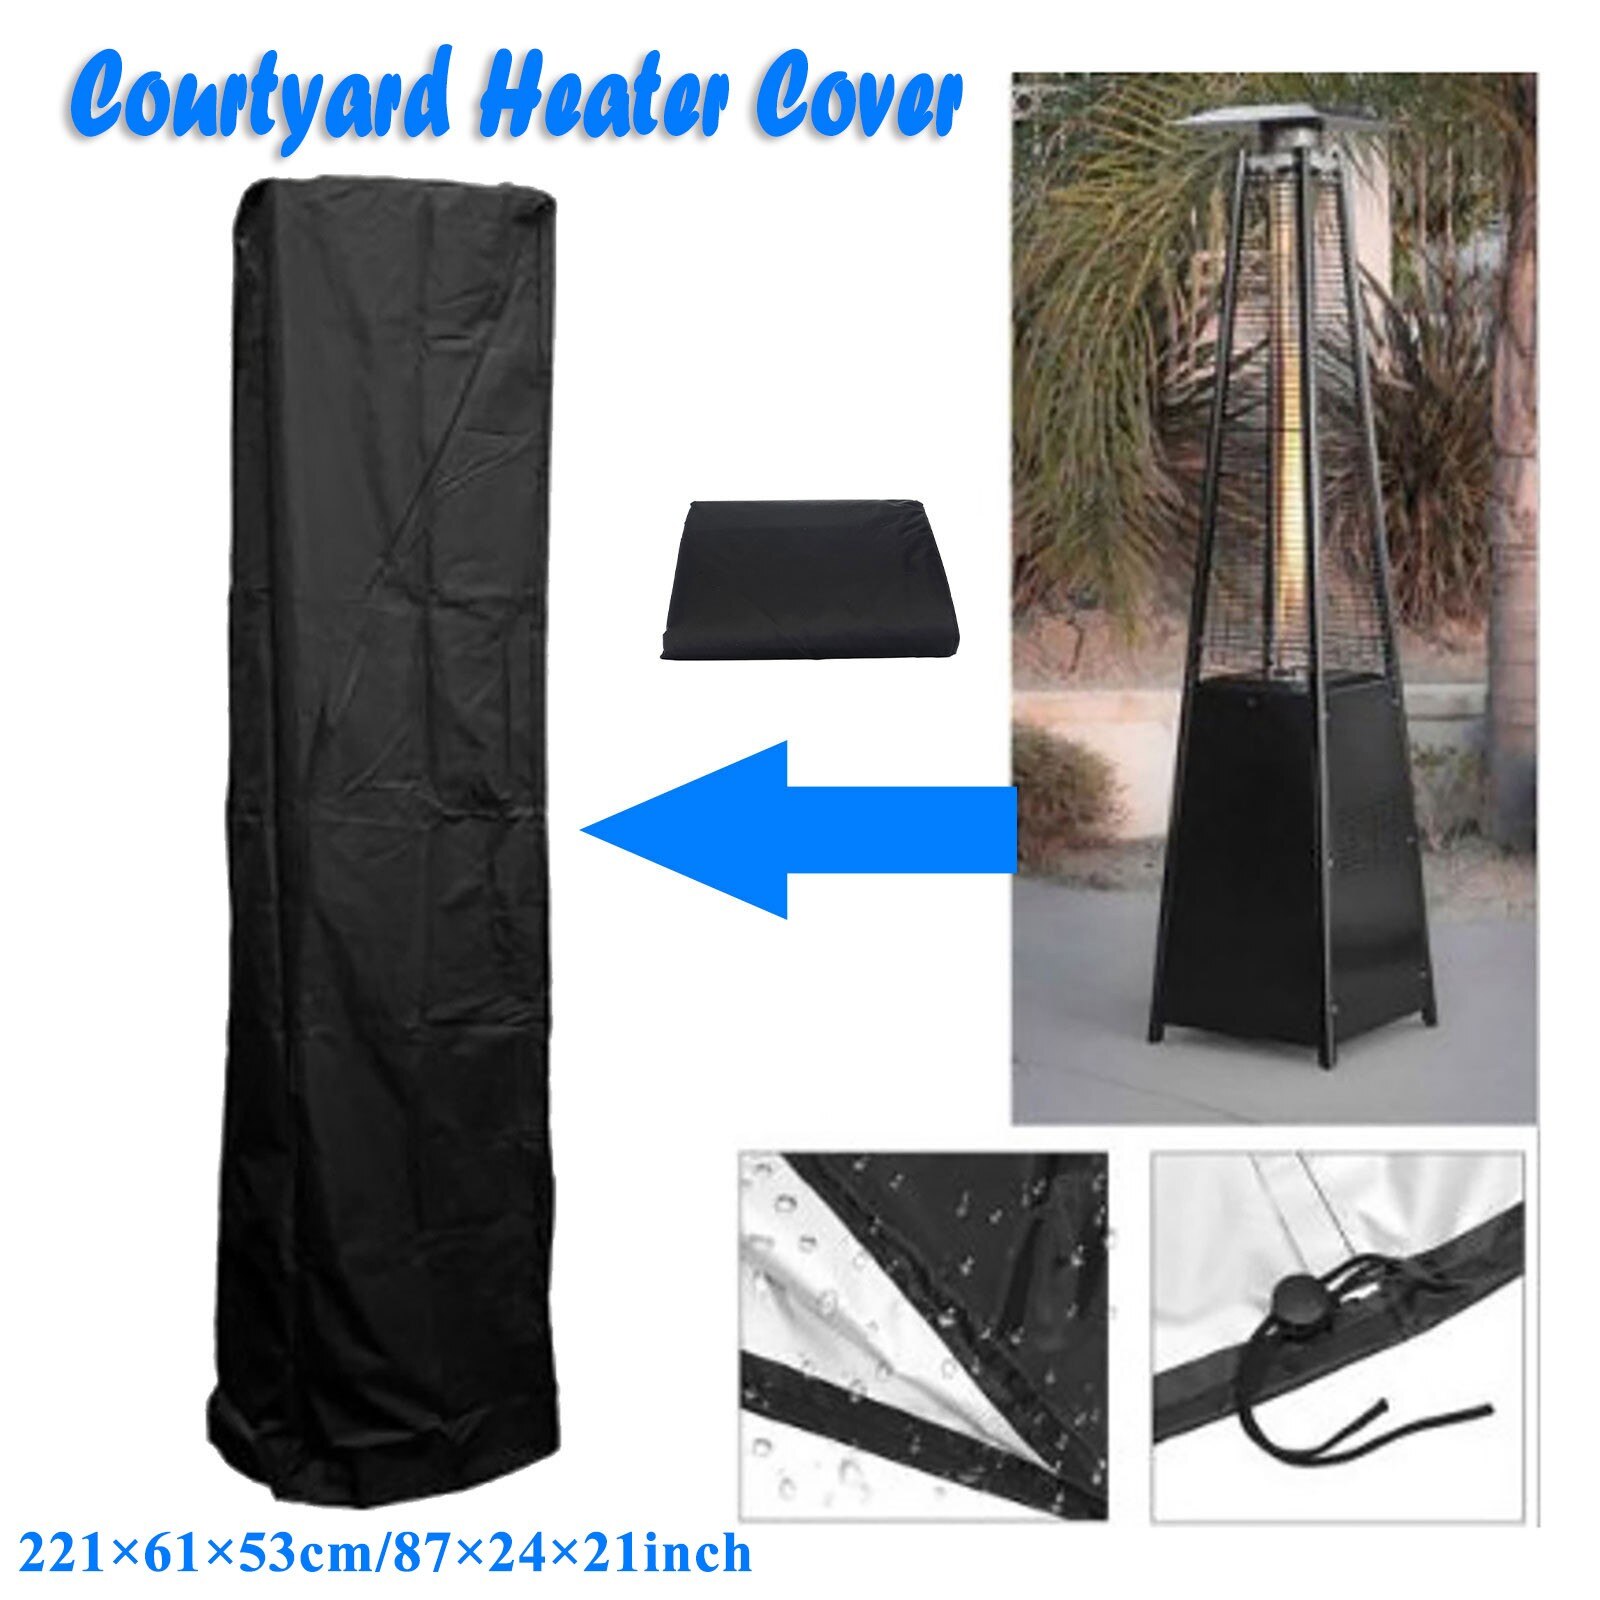 Waterdichte Cover Outdoor Heater Vuile Cover Waterdichte Cover Vierkante Waterdichte Cover Black Patio Heater Cover